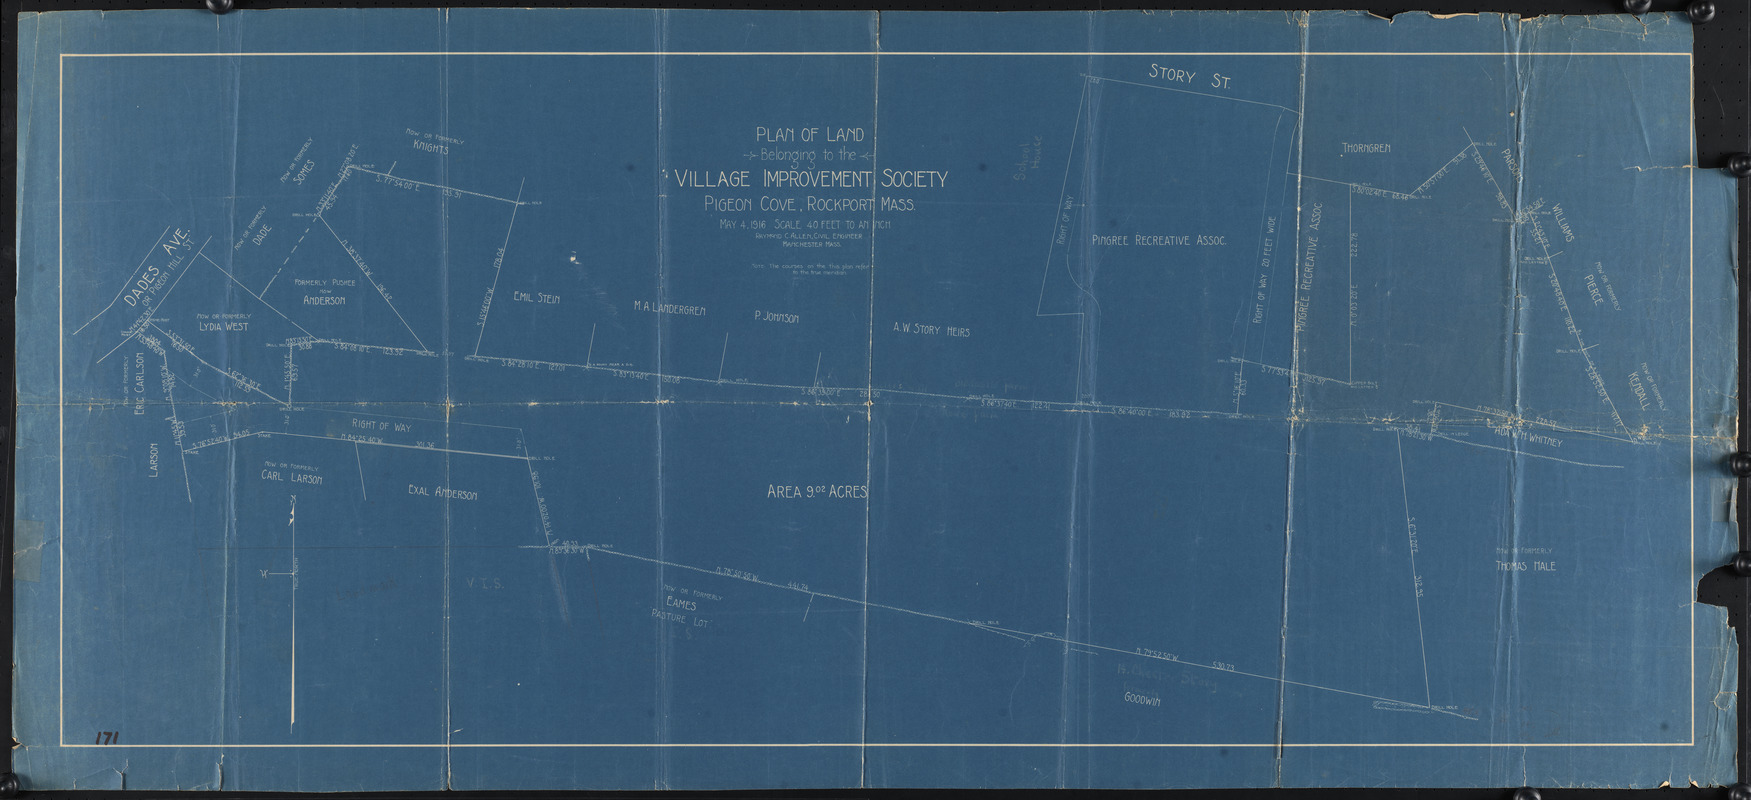 Plan of land belonging to the Village Improvement Society, Pigeon Cove, Rockport, Mass.